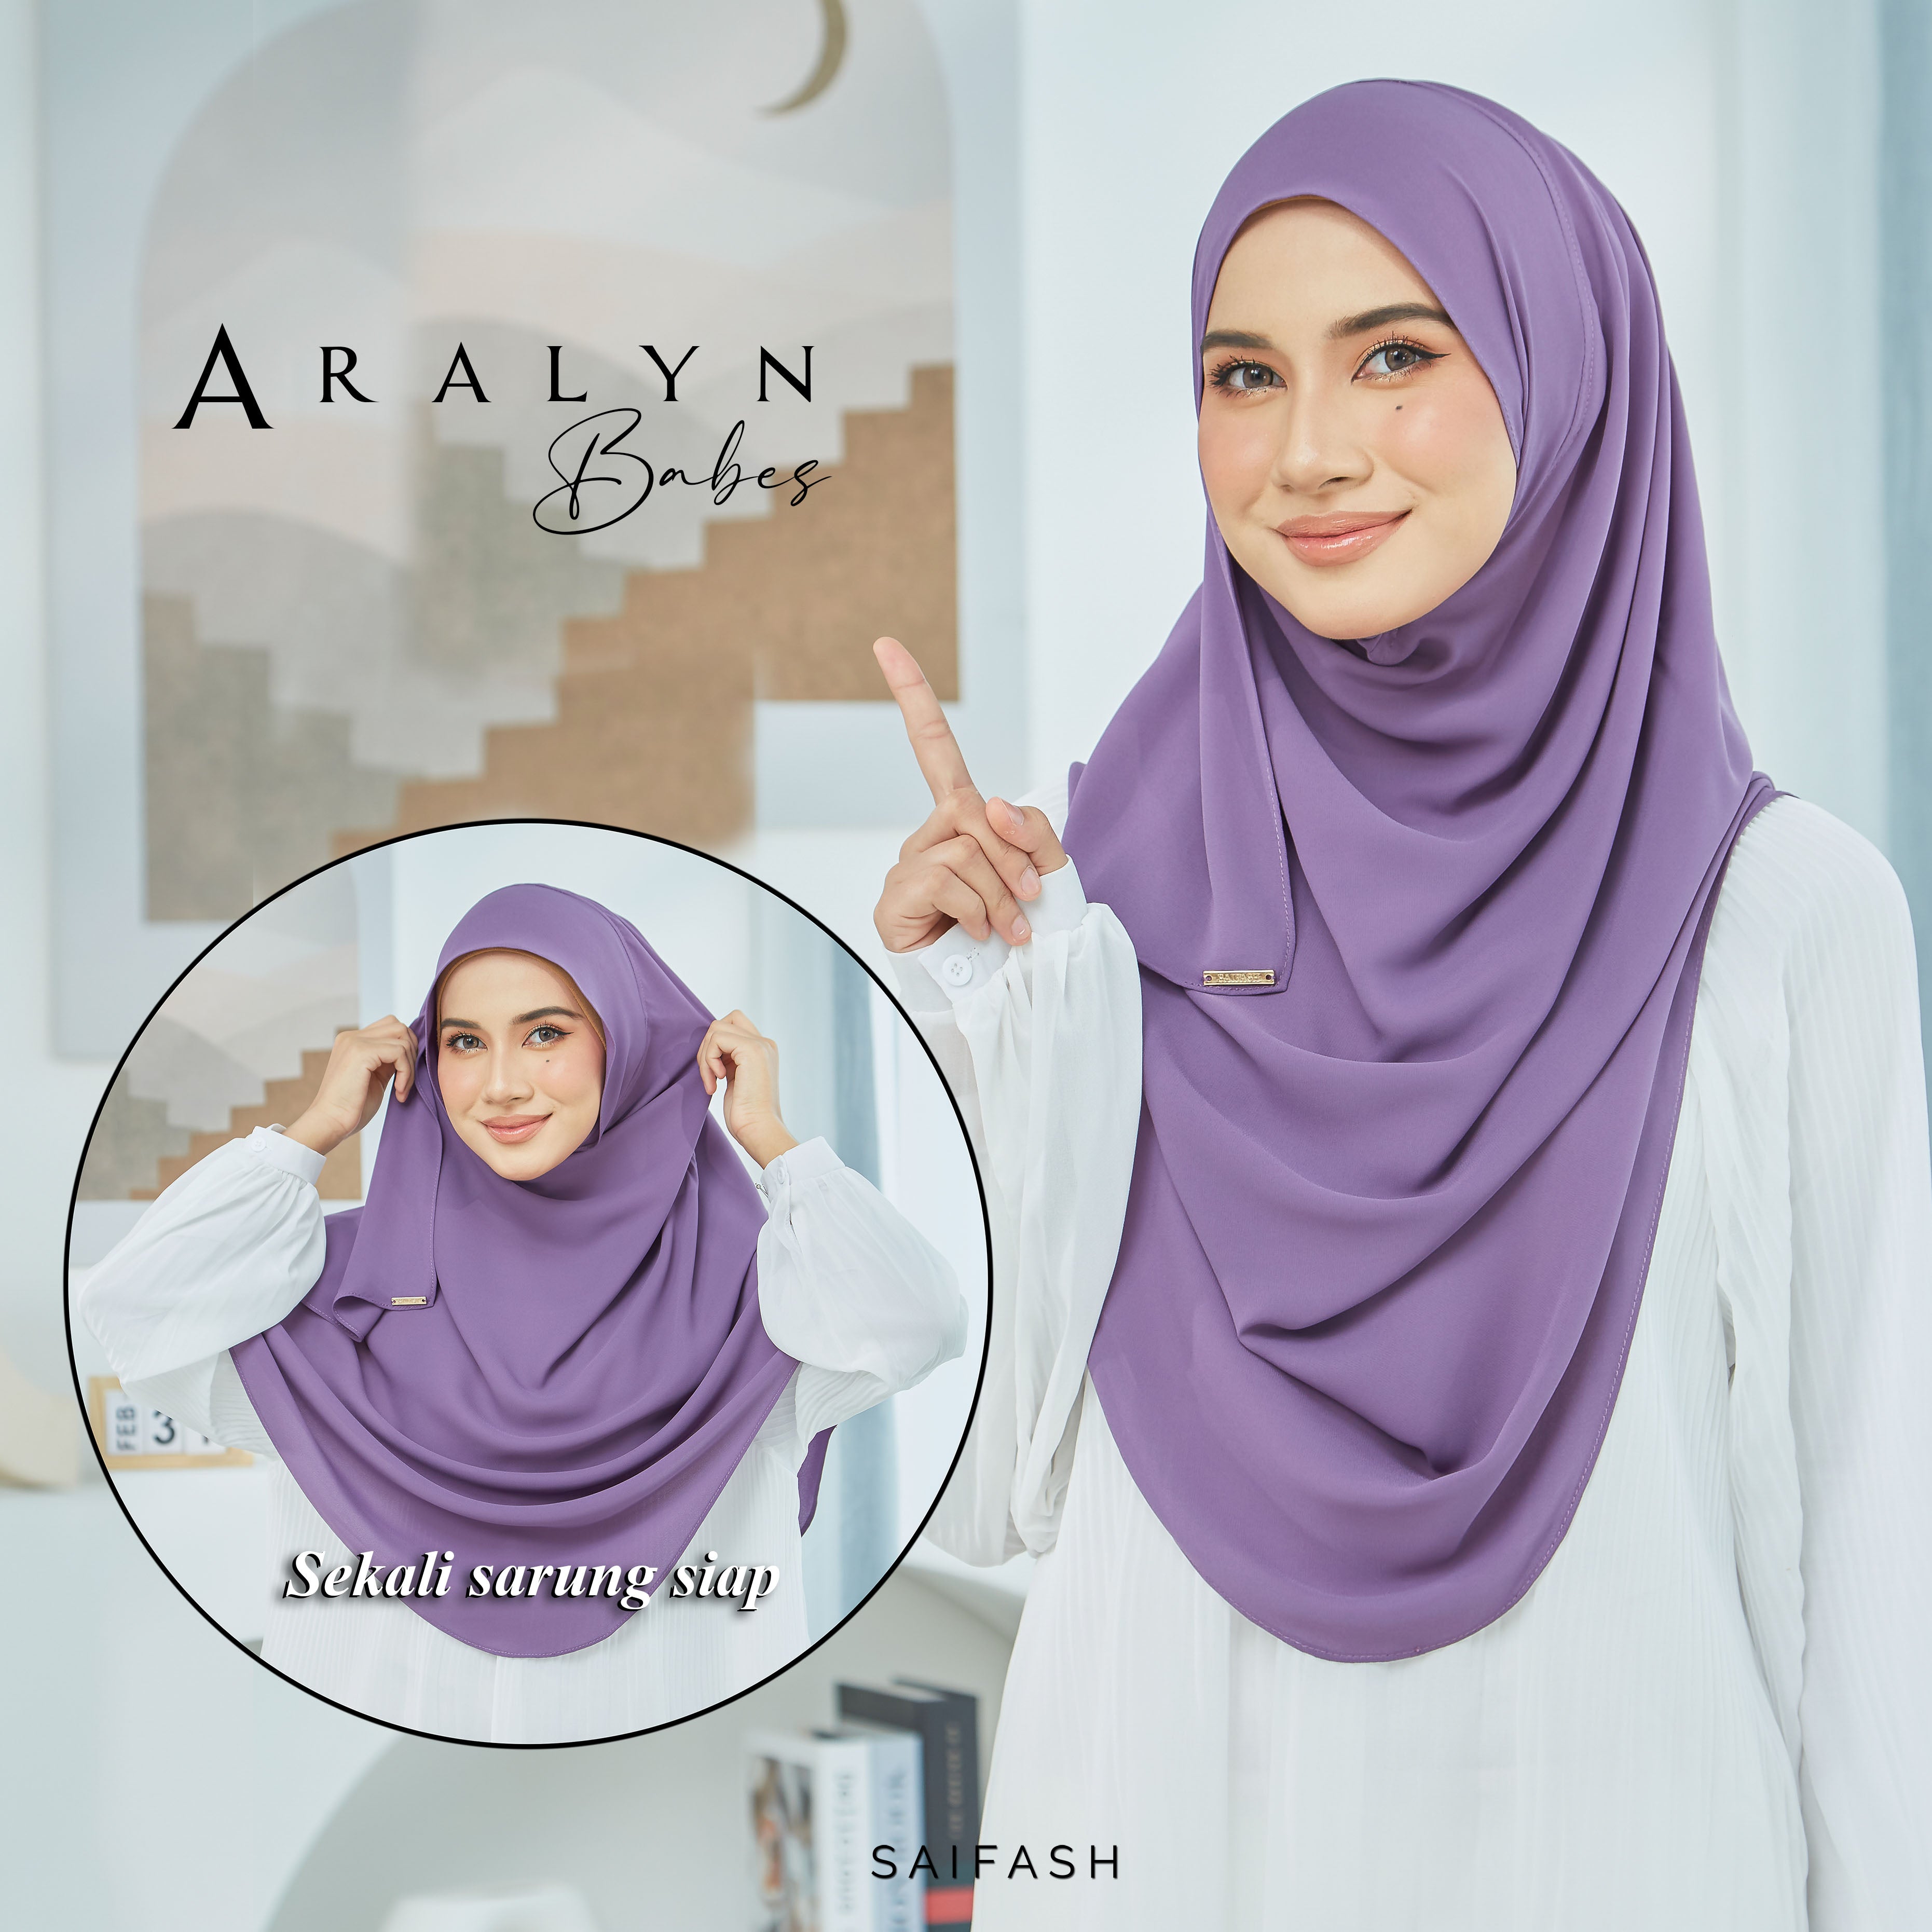 Aralyn Babes Instant Hijab in Silver